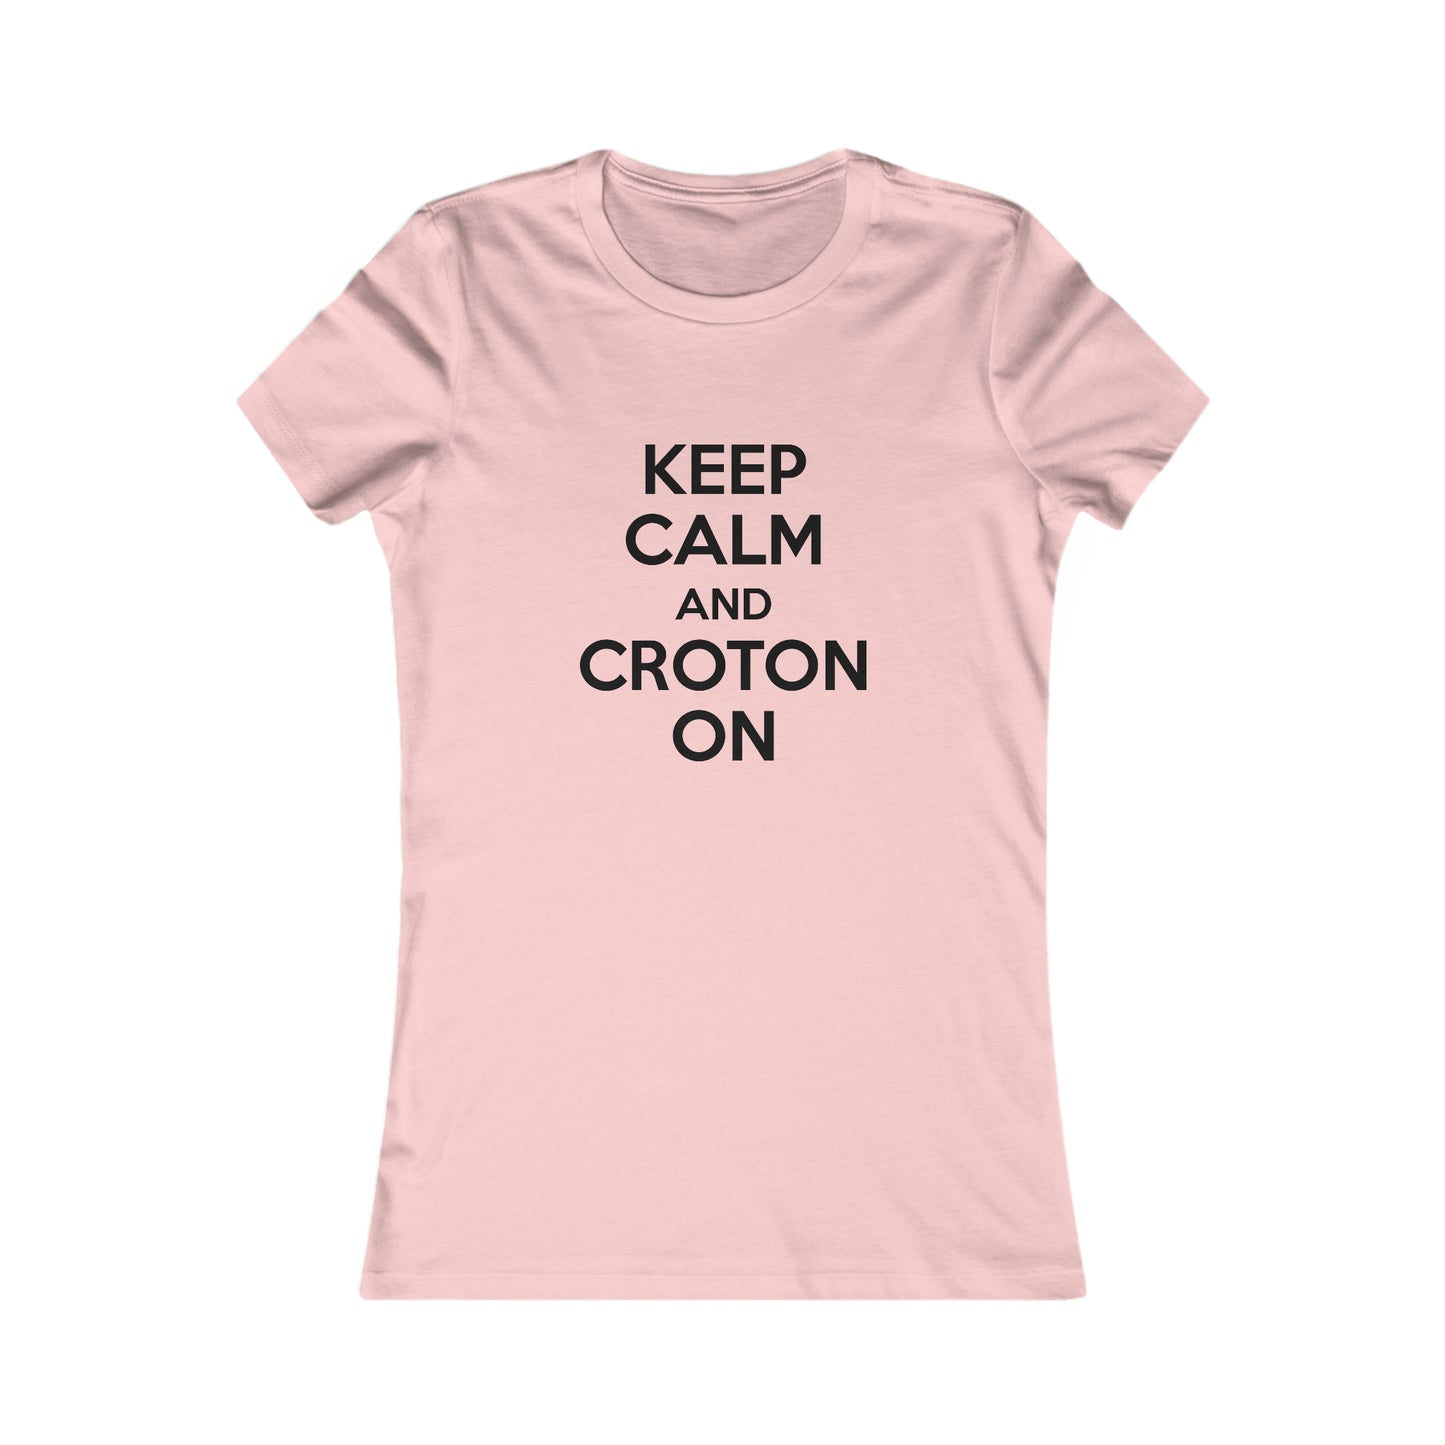 Women's Fitted Keep Calm and Croton ON Tee (White/Light Colors)